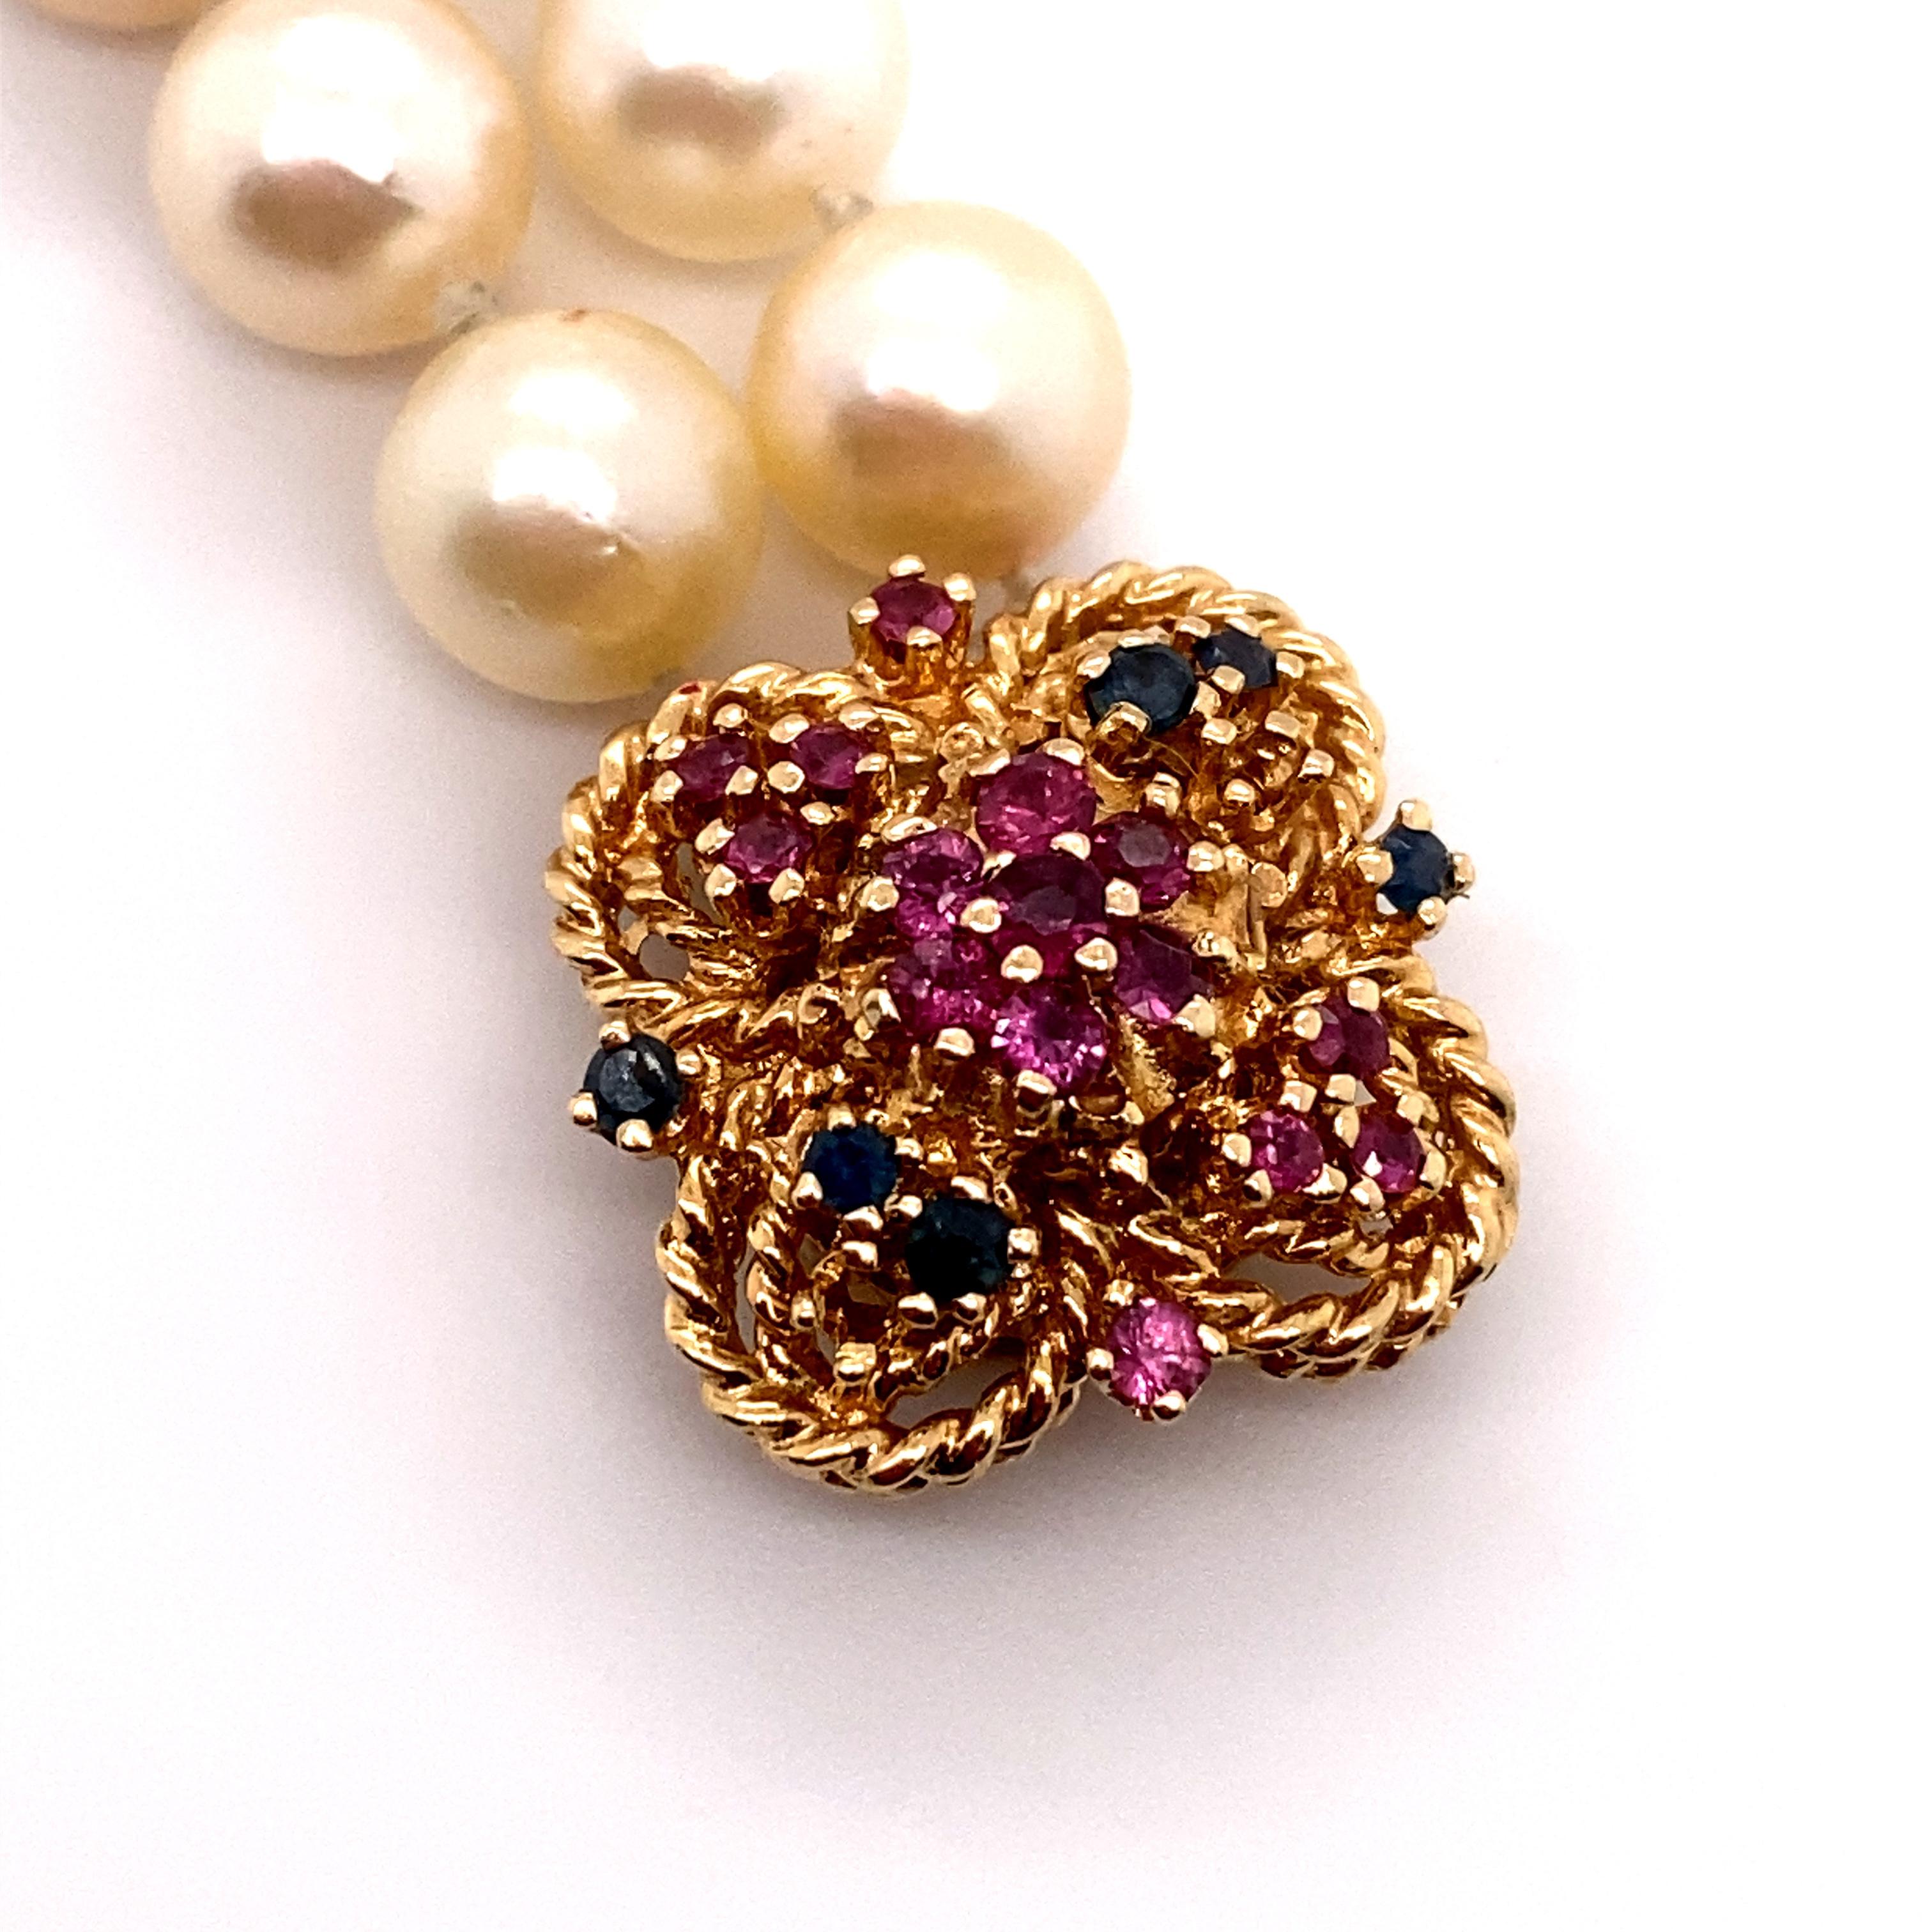 Circa: 1980
Metal Type: 14 Karat Yellow Gold
Length: 7 inches

Features Ruby and Sapphire gemstones on the clasp 